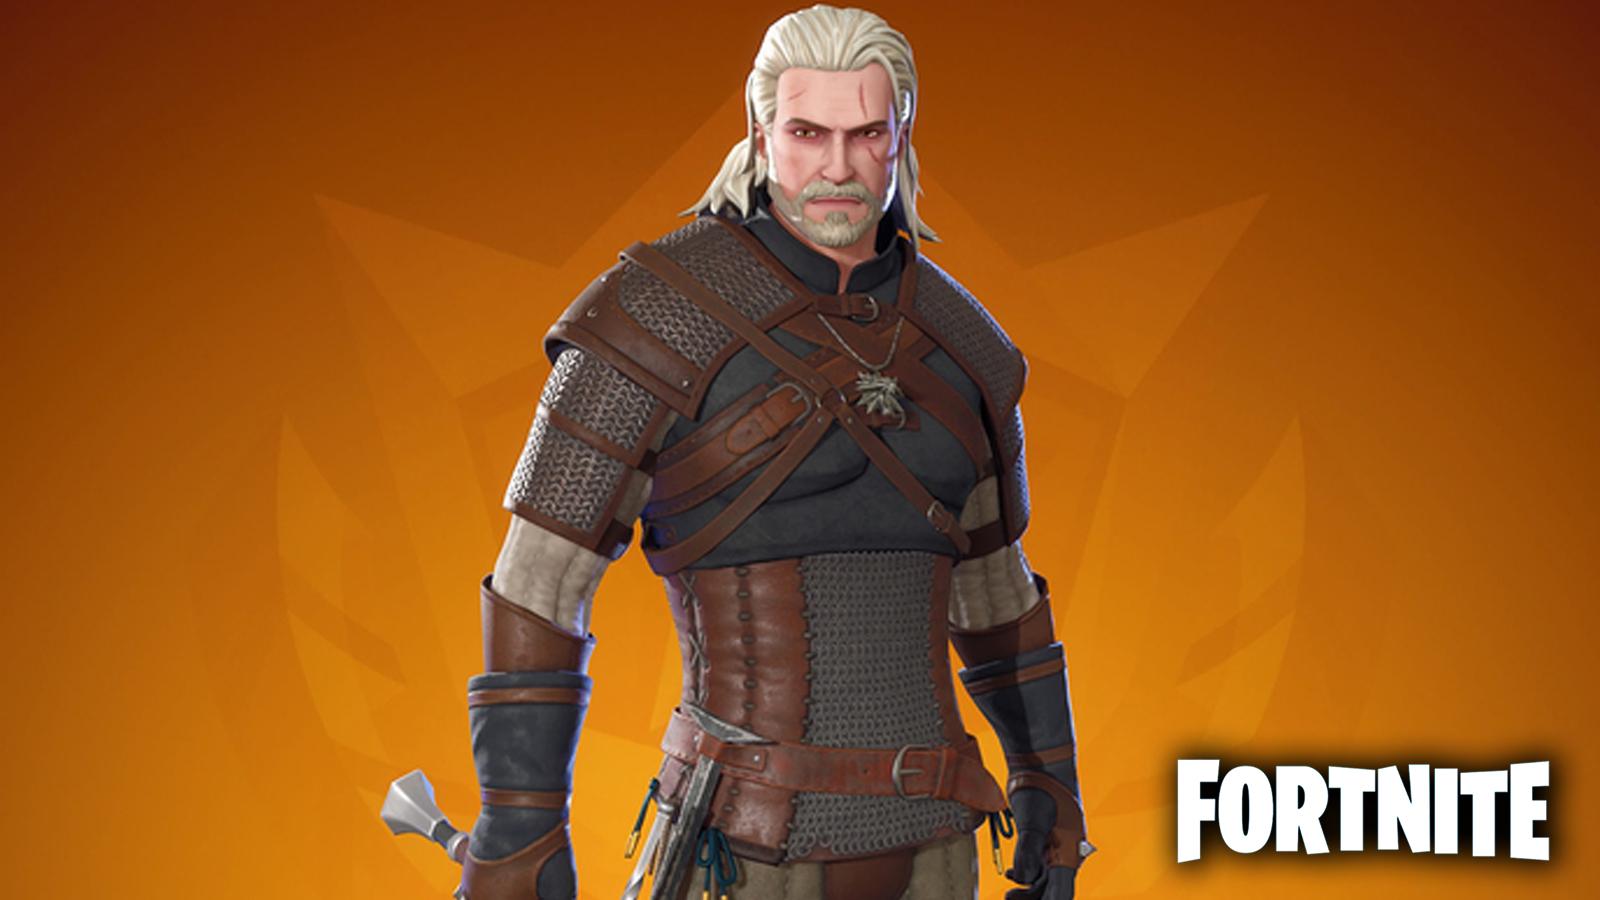 Geralt of Rivia in Fortnite: how to get his outfit and all his